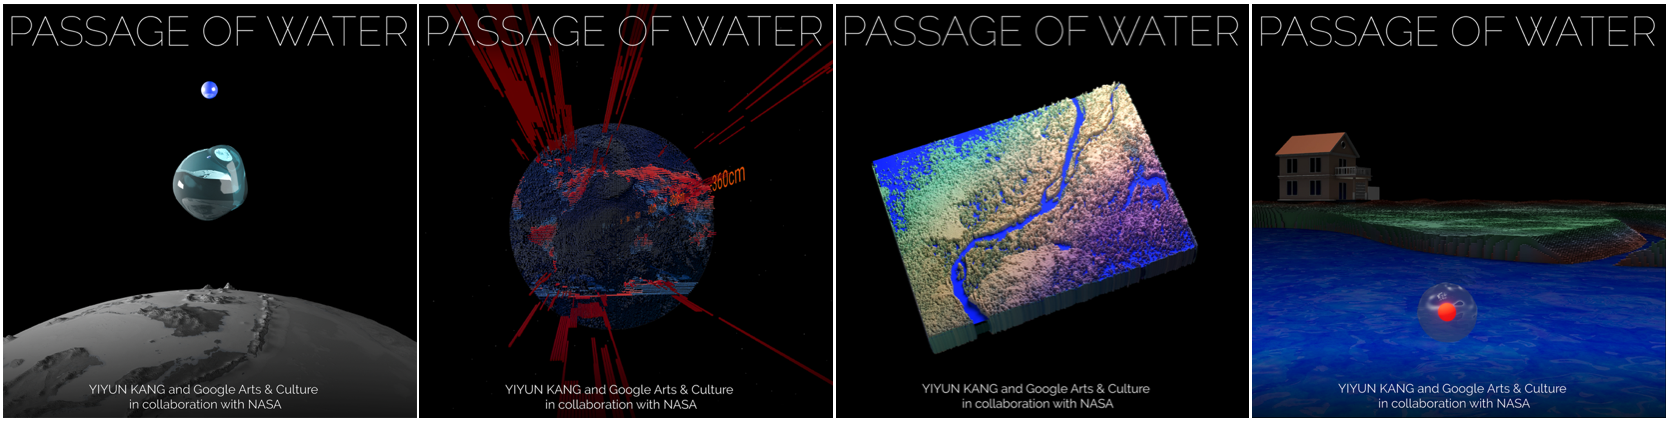 Figure 1. Passage of Water, Online Experience version launched in Google Arts and Culture